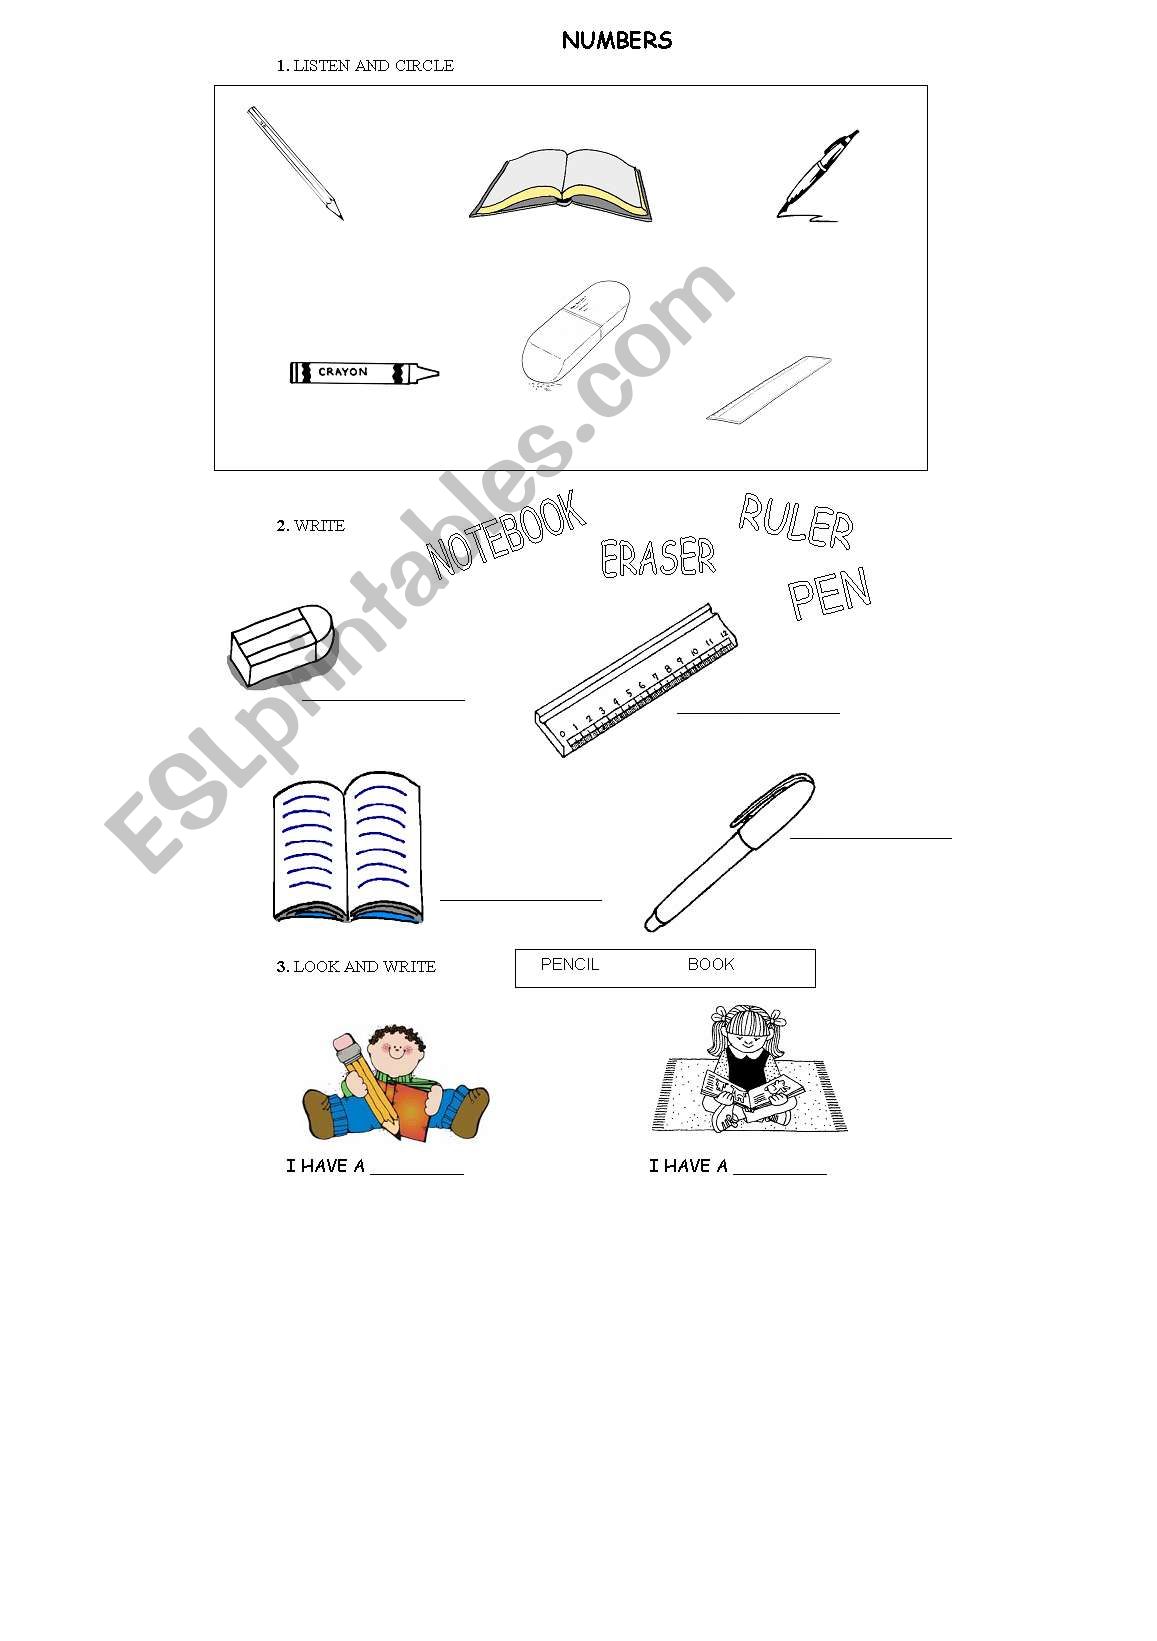 OUR CLASSROOM worksheet